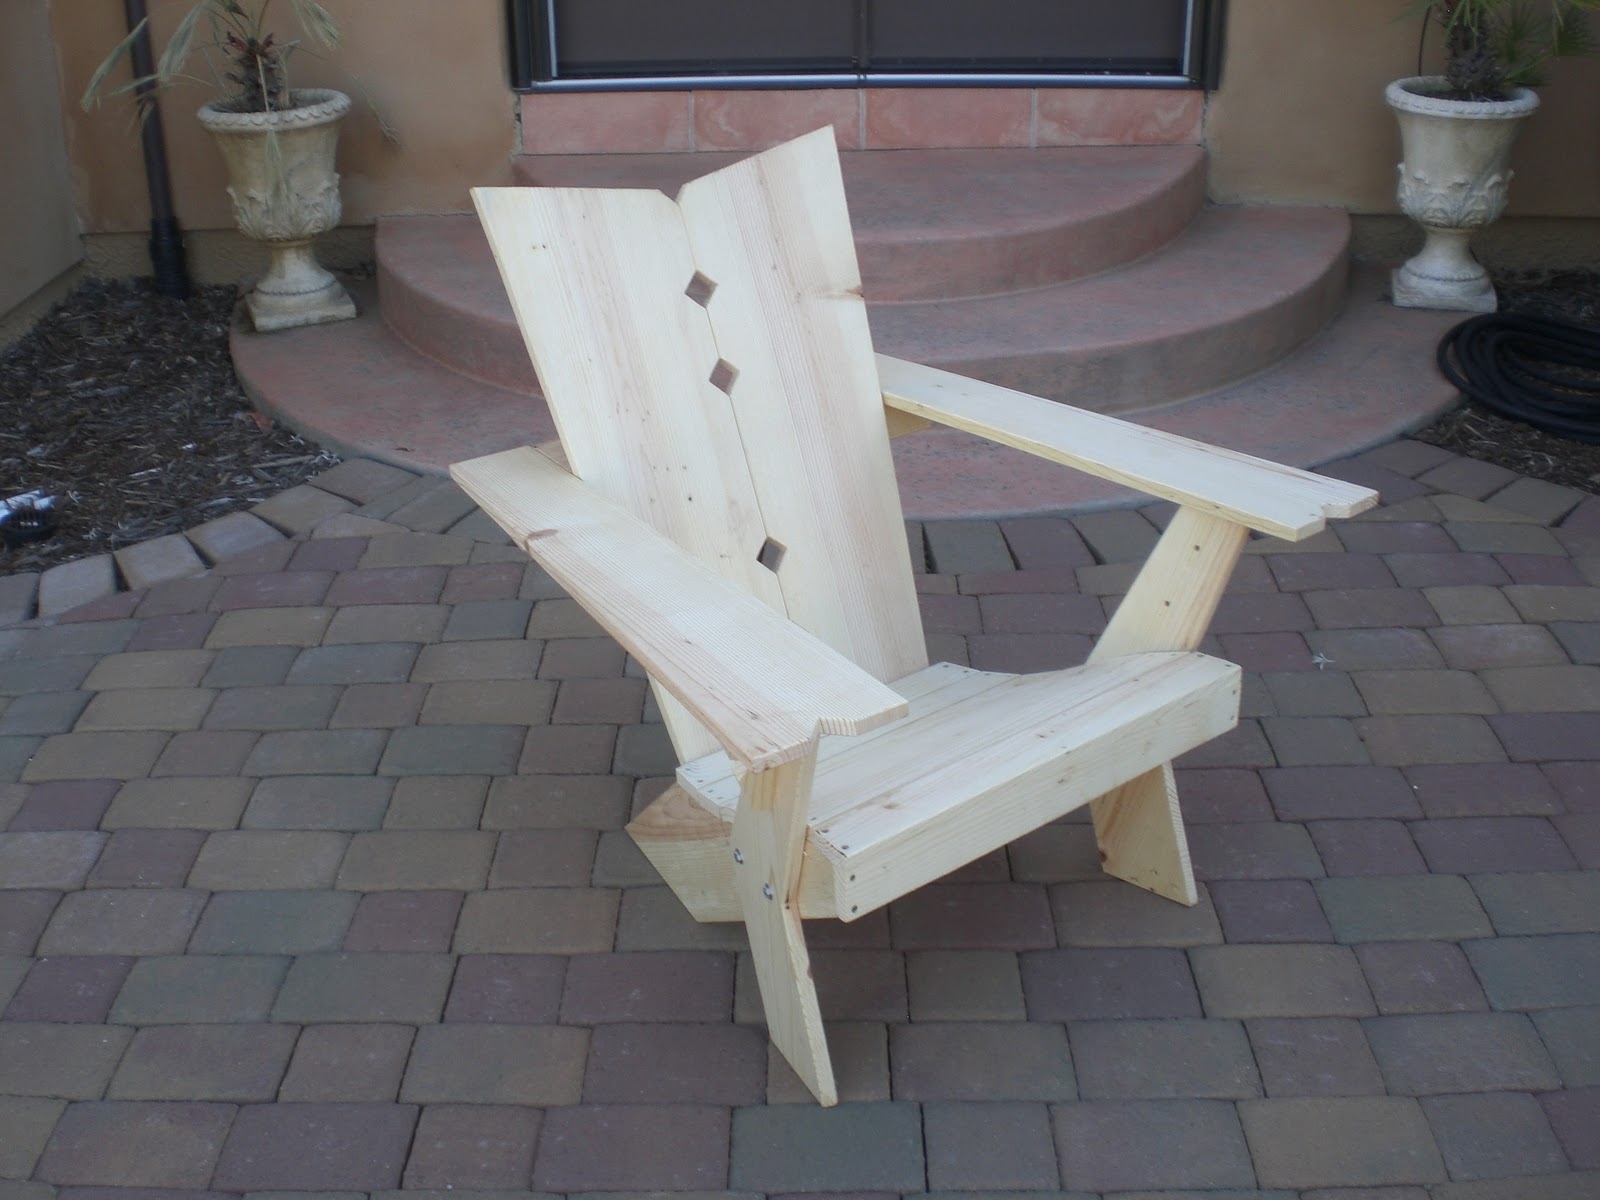 easy to sell woodworking projects